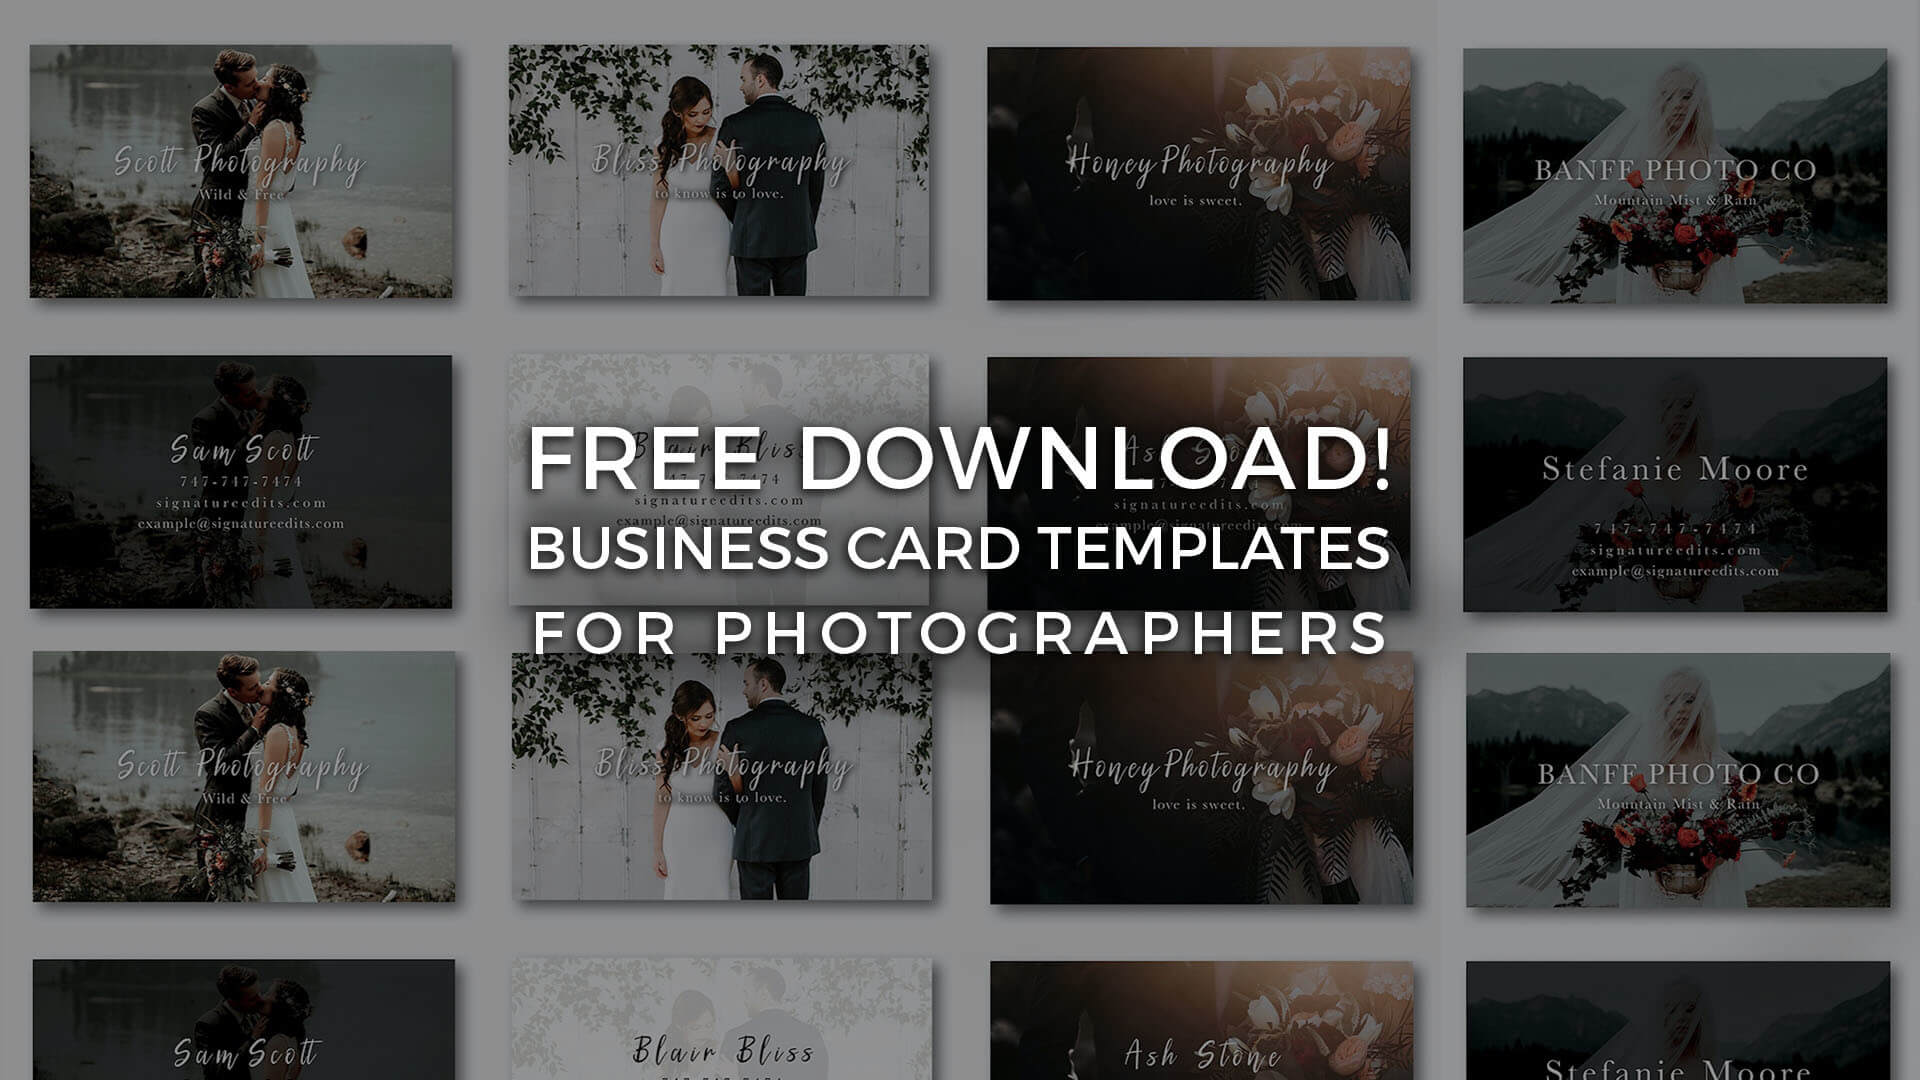 Free Photographer Business Card Templates! - Signature Edits In Free Business Card Templates For Photographers